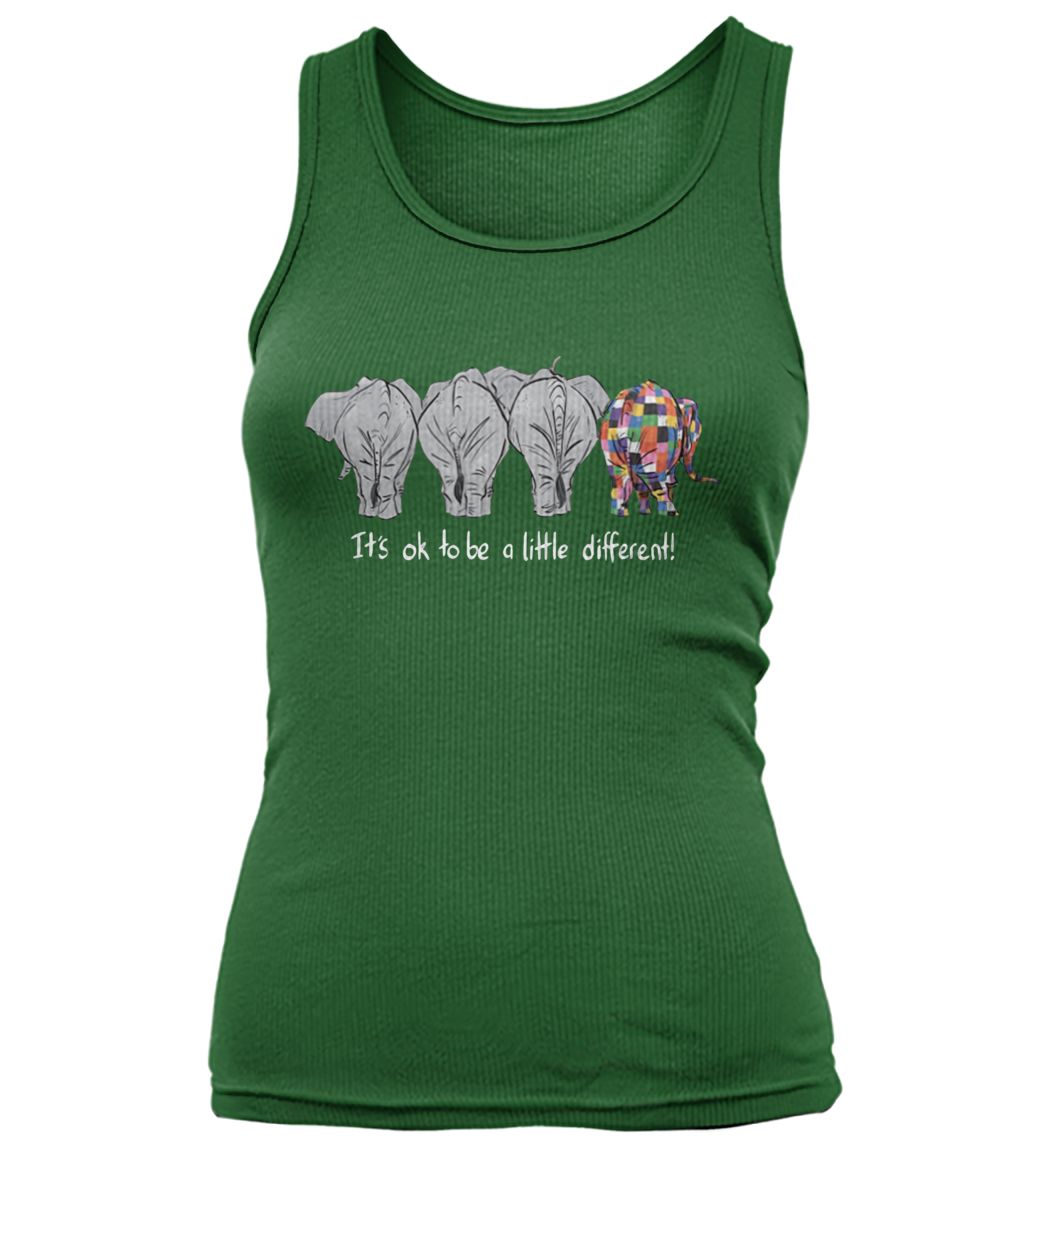 It's ok to be a little different autism awareness women's tank top